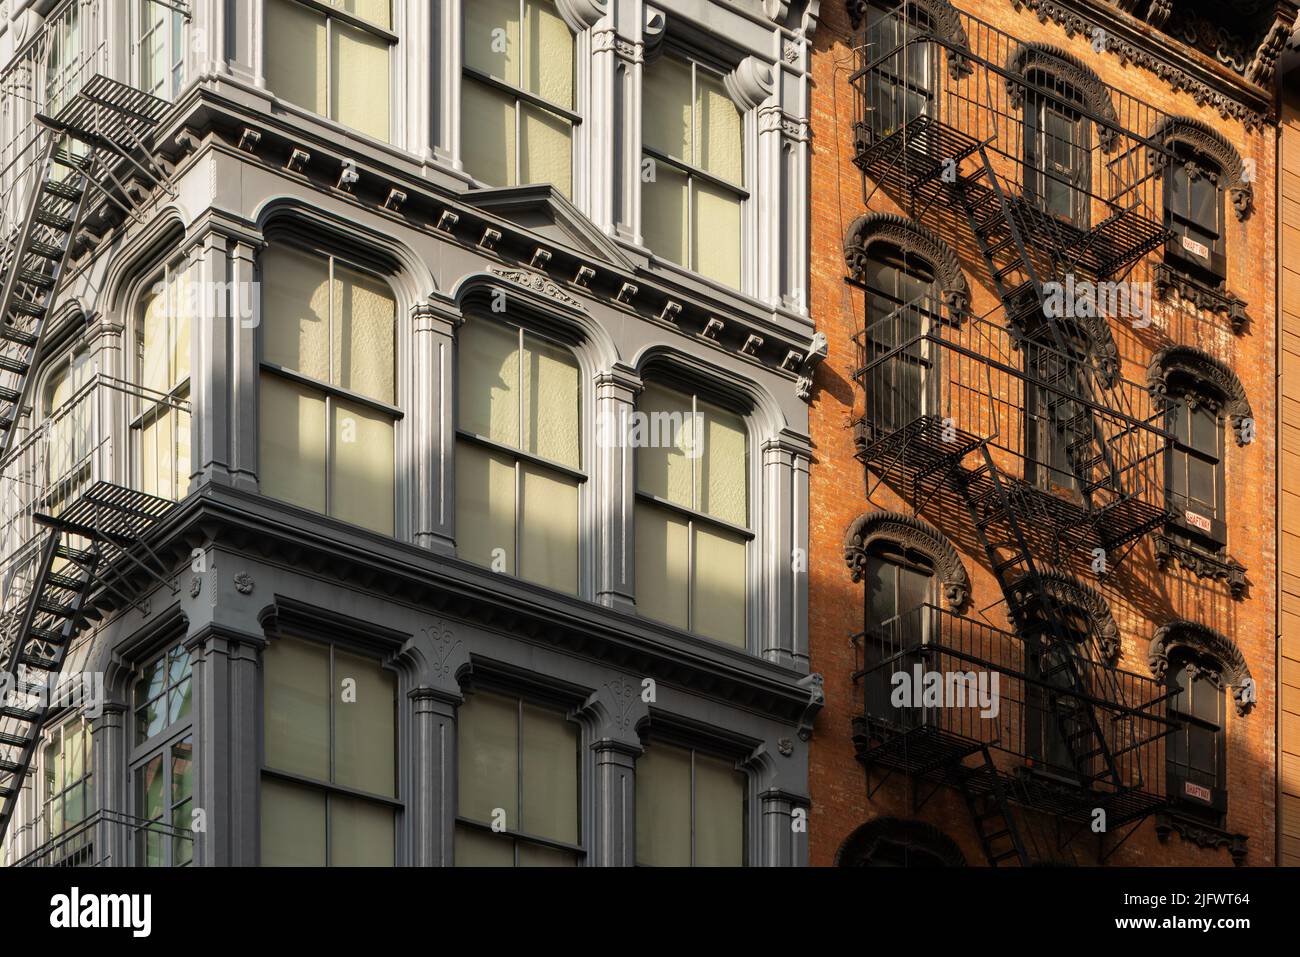 Cast iron and brick facades of Soho loft buildings with fire escapes at sunset. Soho Cast Iron Building Historic District, Manhattan, New York City Stock Photo